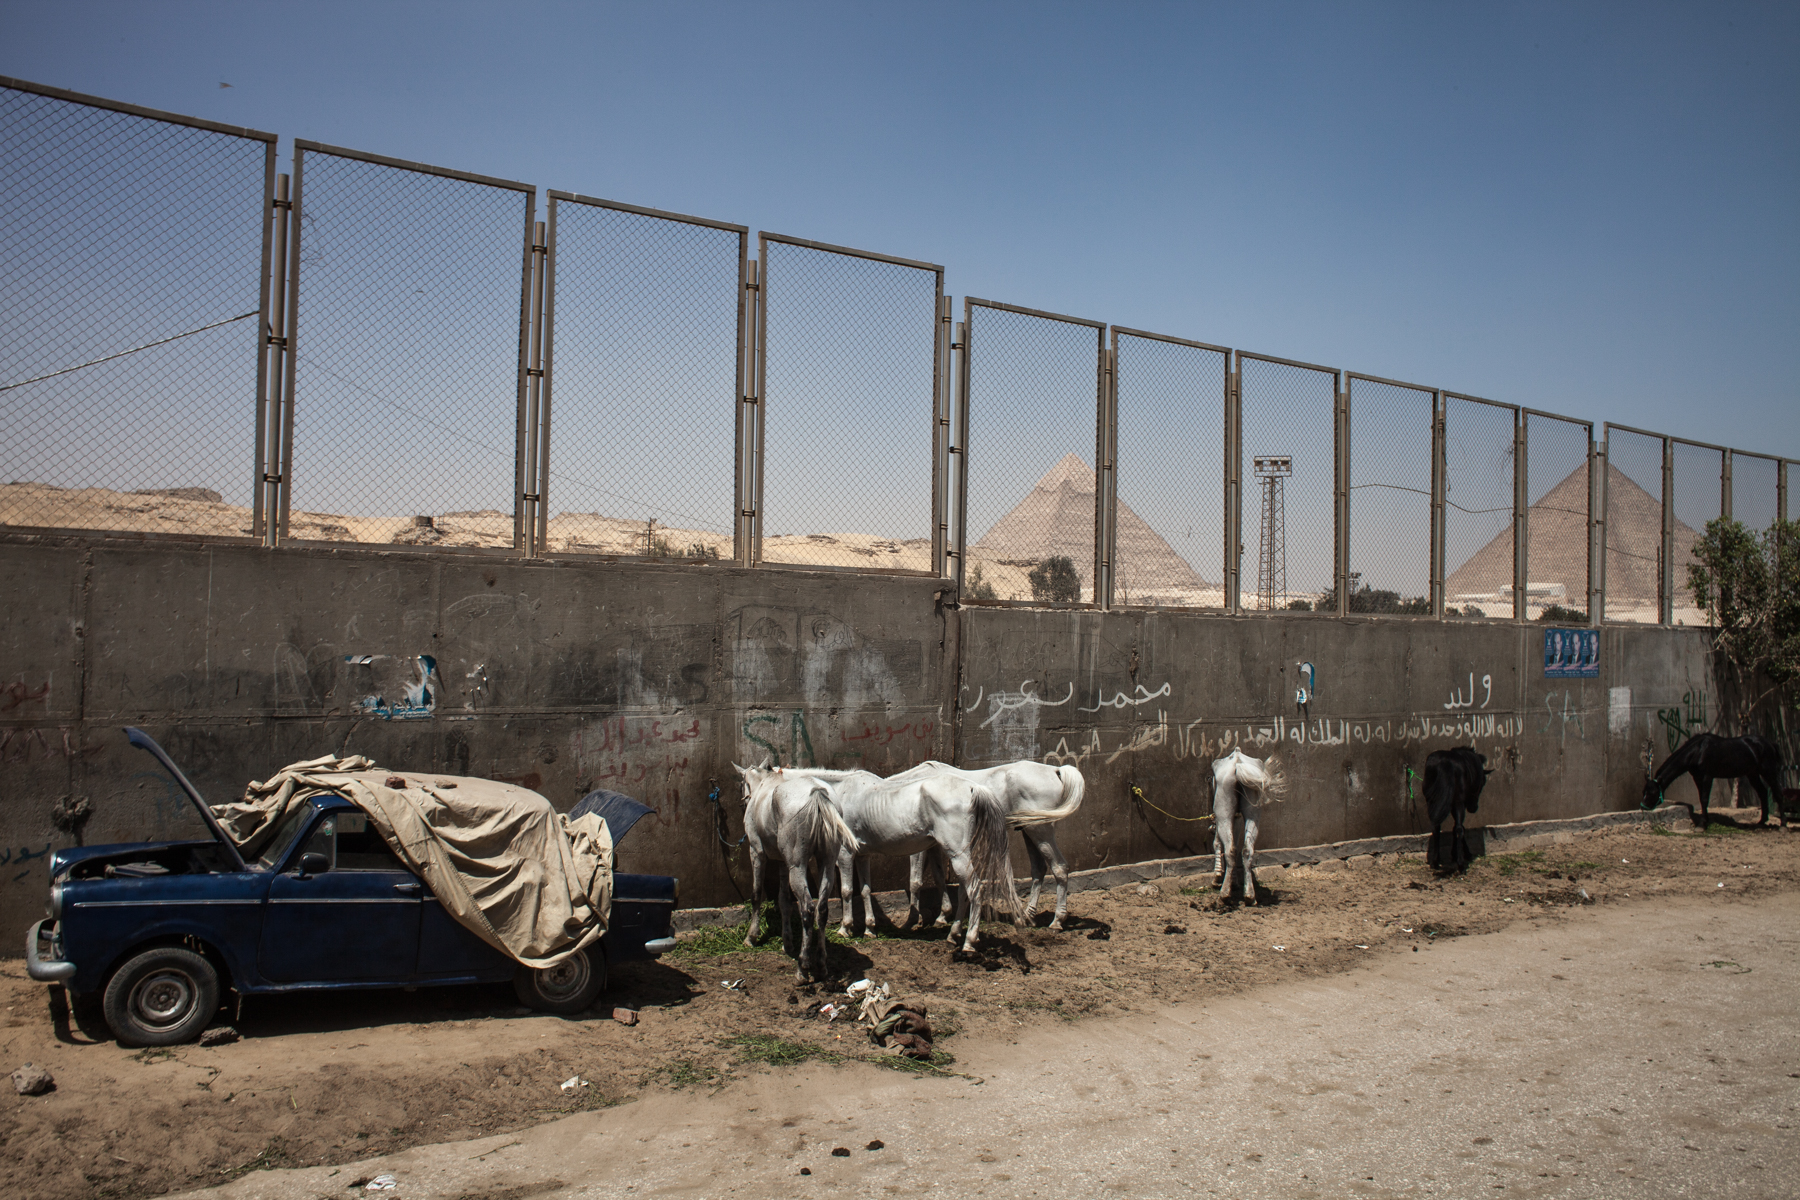 Behind the wall in the Egyptian town of Giza the famous pyramids are seen in the background